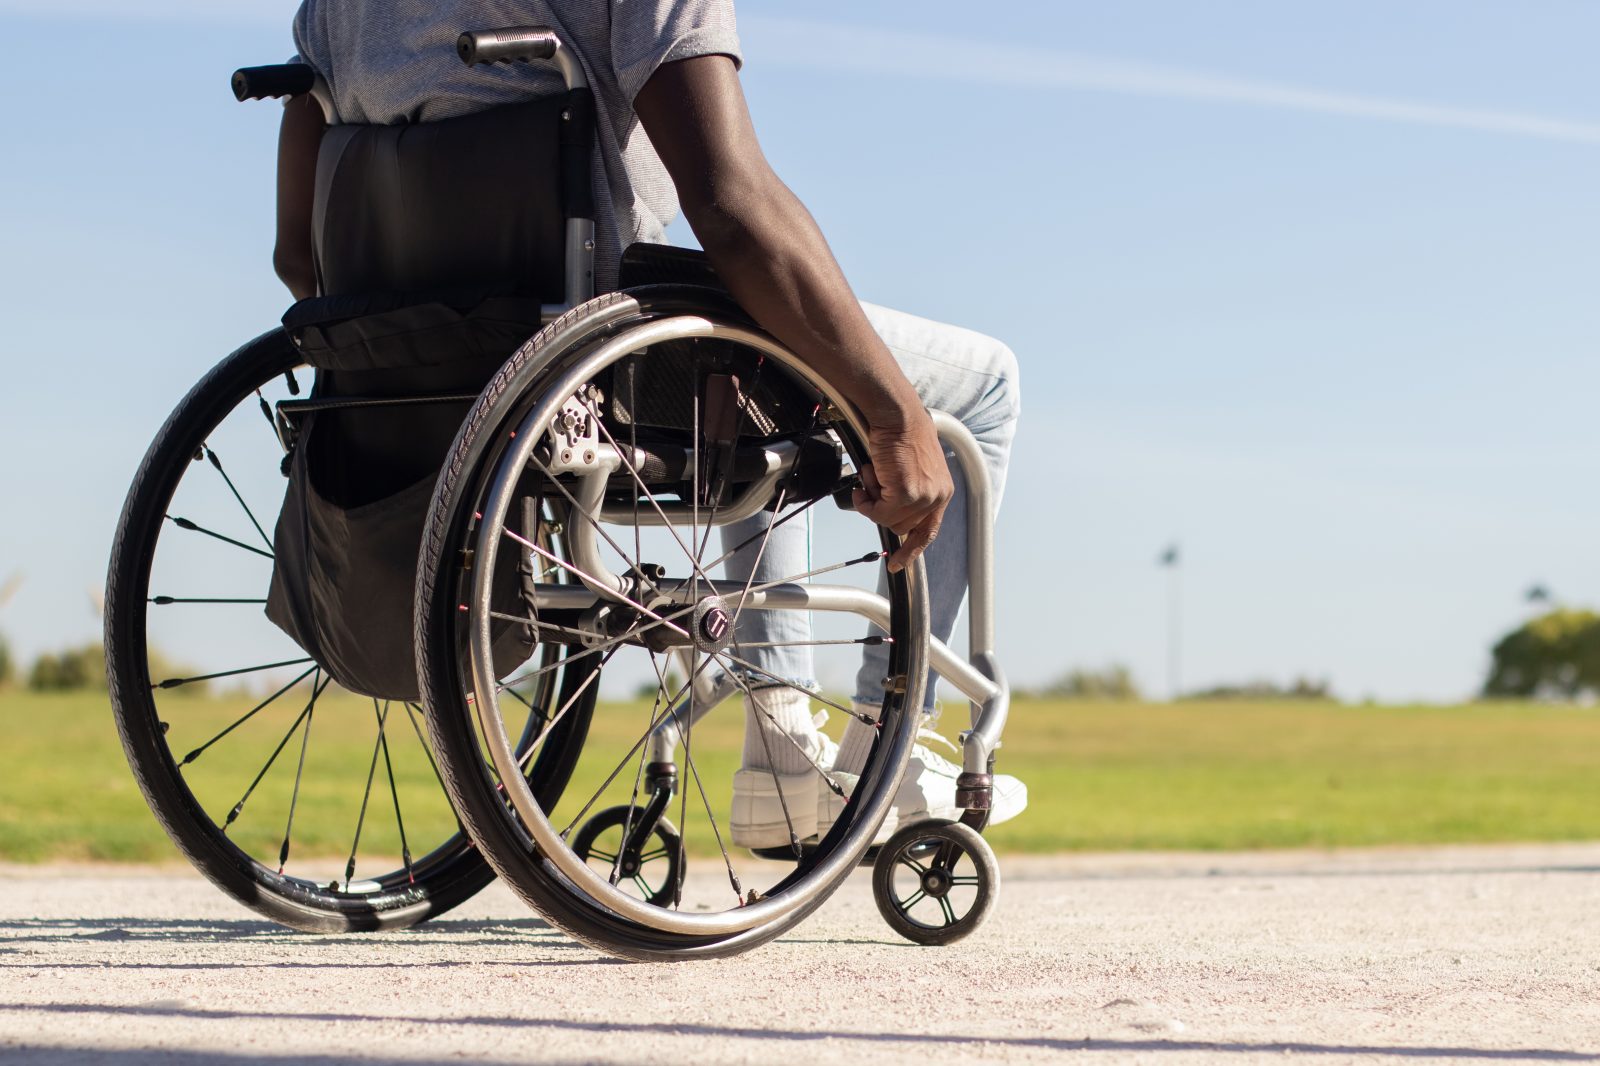 13 Legal Tips for Managing Long-Term Disability After a Severe Truck Accident in Indiana